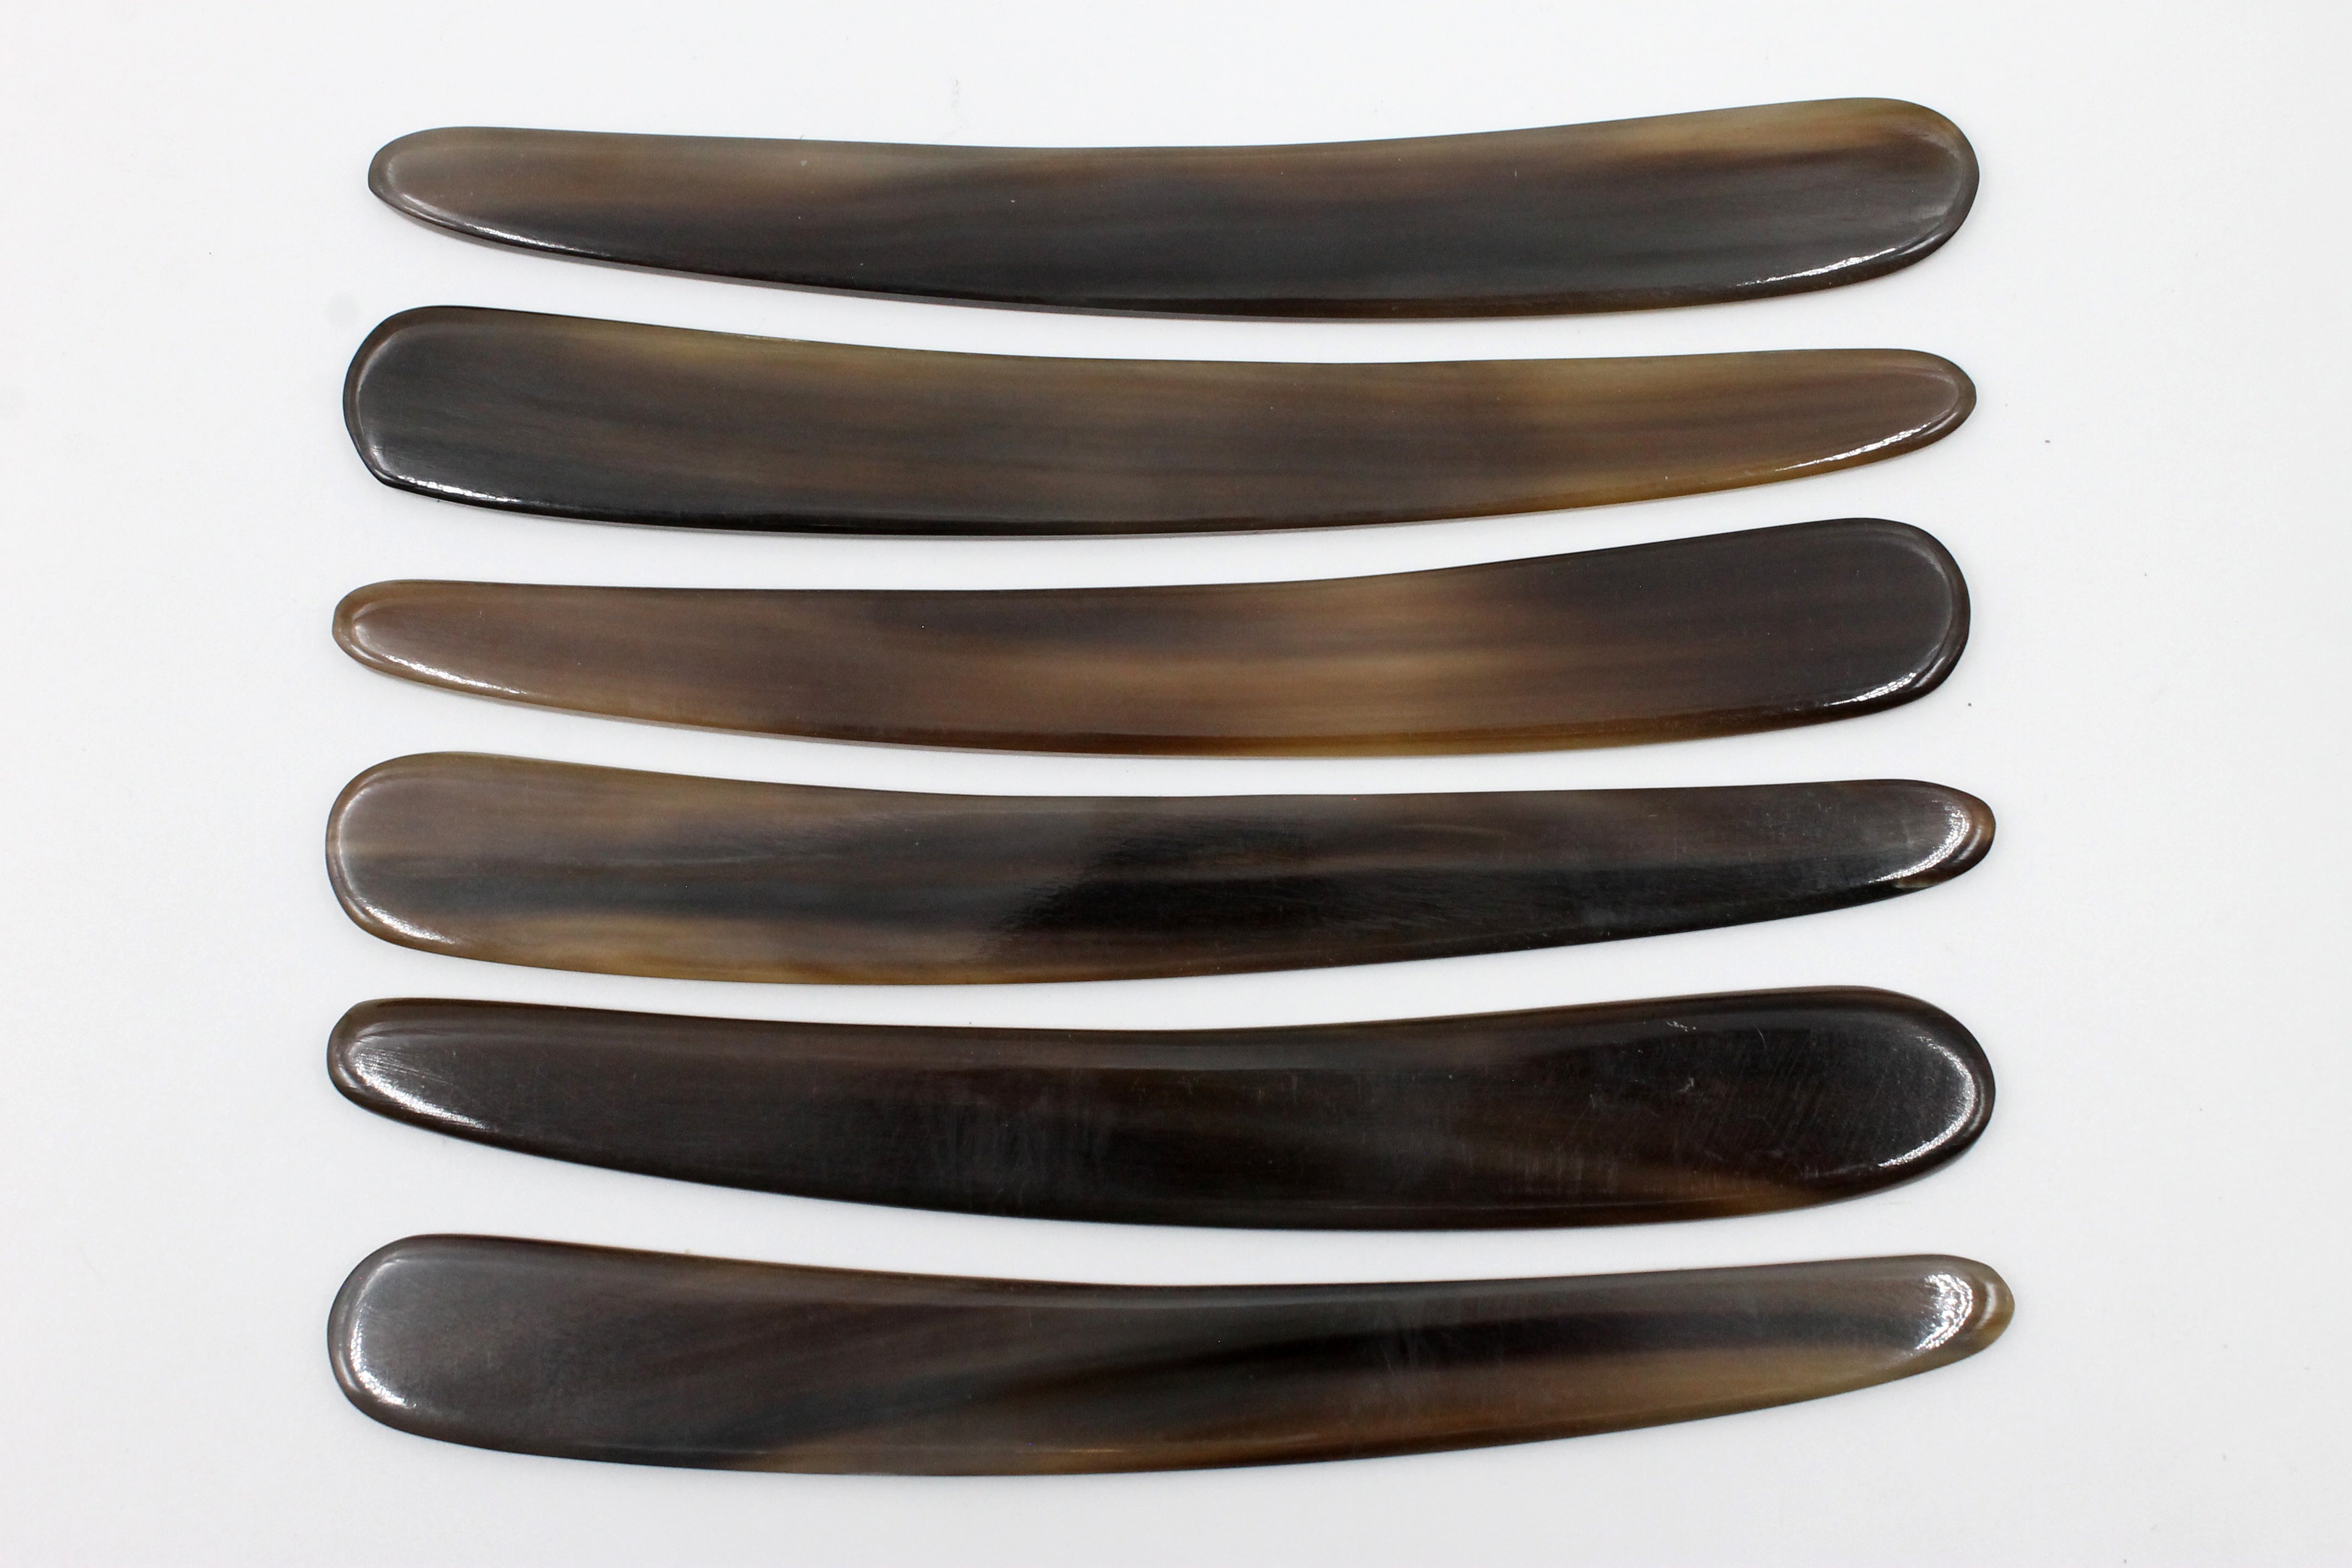 Straight Razor Scales for 5/8-6/8 blades - Dark Brown Buffalo Horn - One Pair/Set